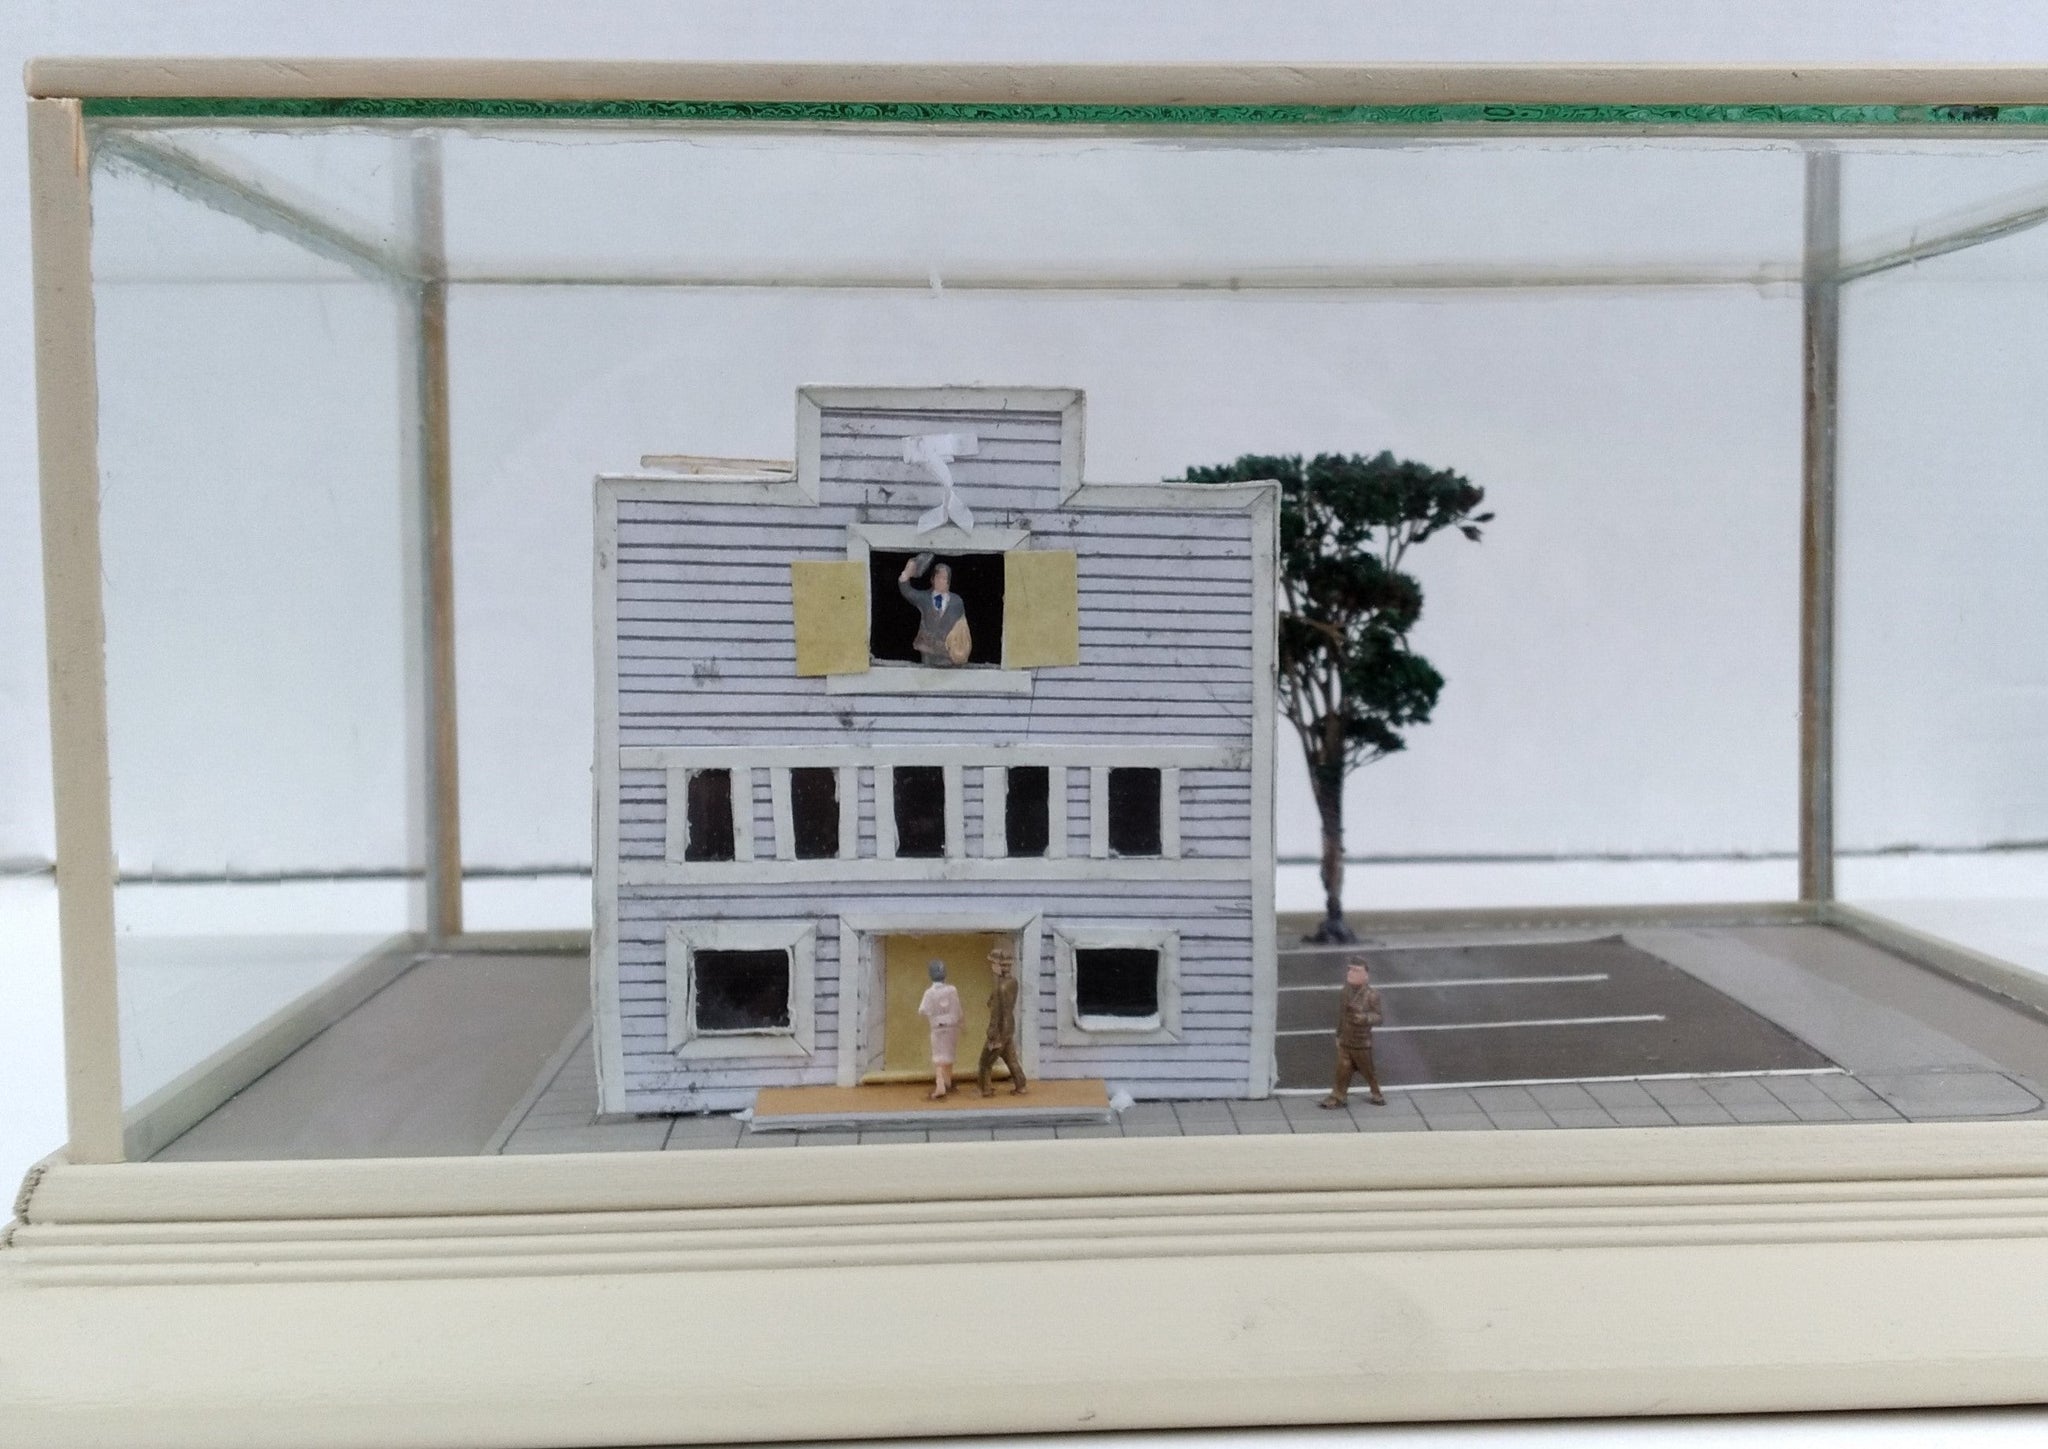 The Feed Store, scratch built paper building